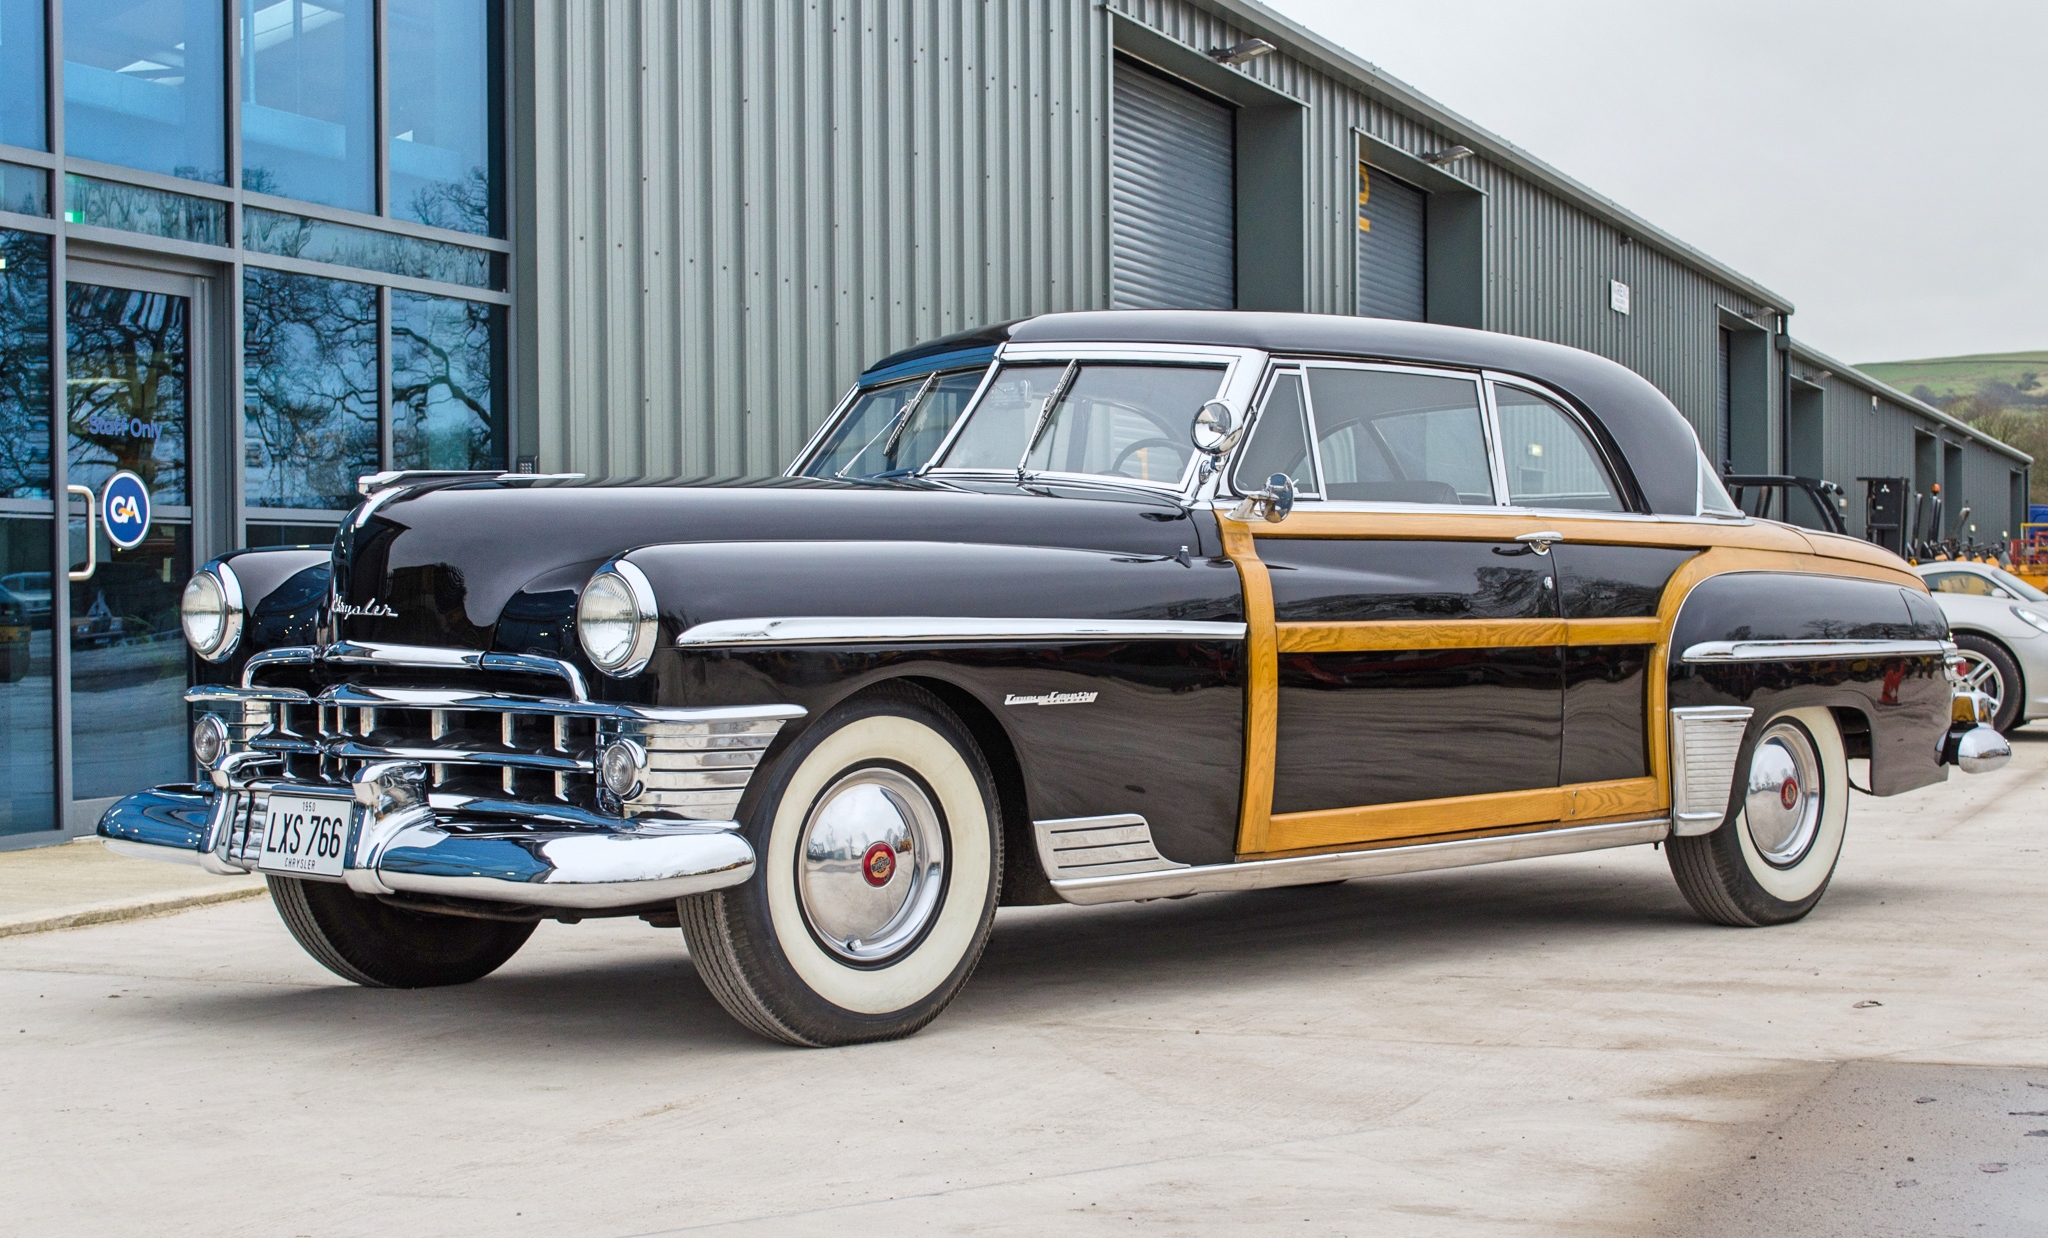 1950 Chrysler Newport Town and Country 5300cc 2 door Coupe - Image 3 of 62